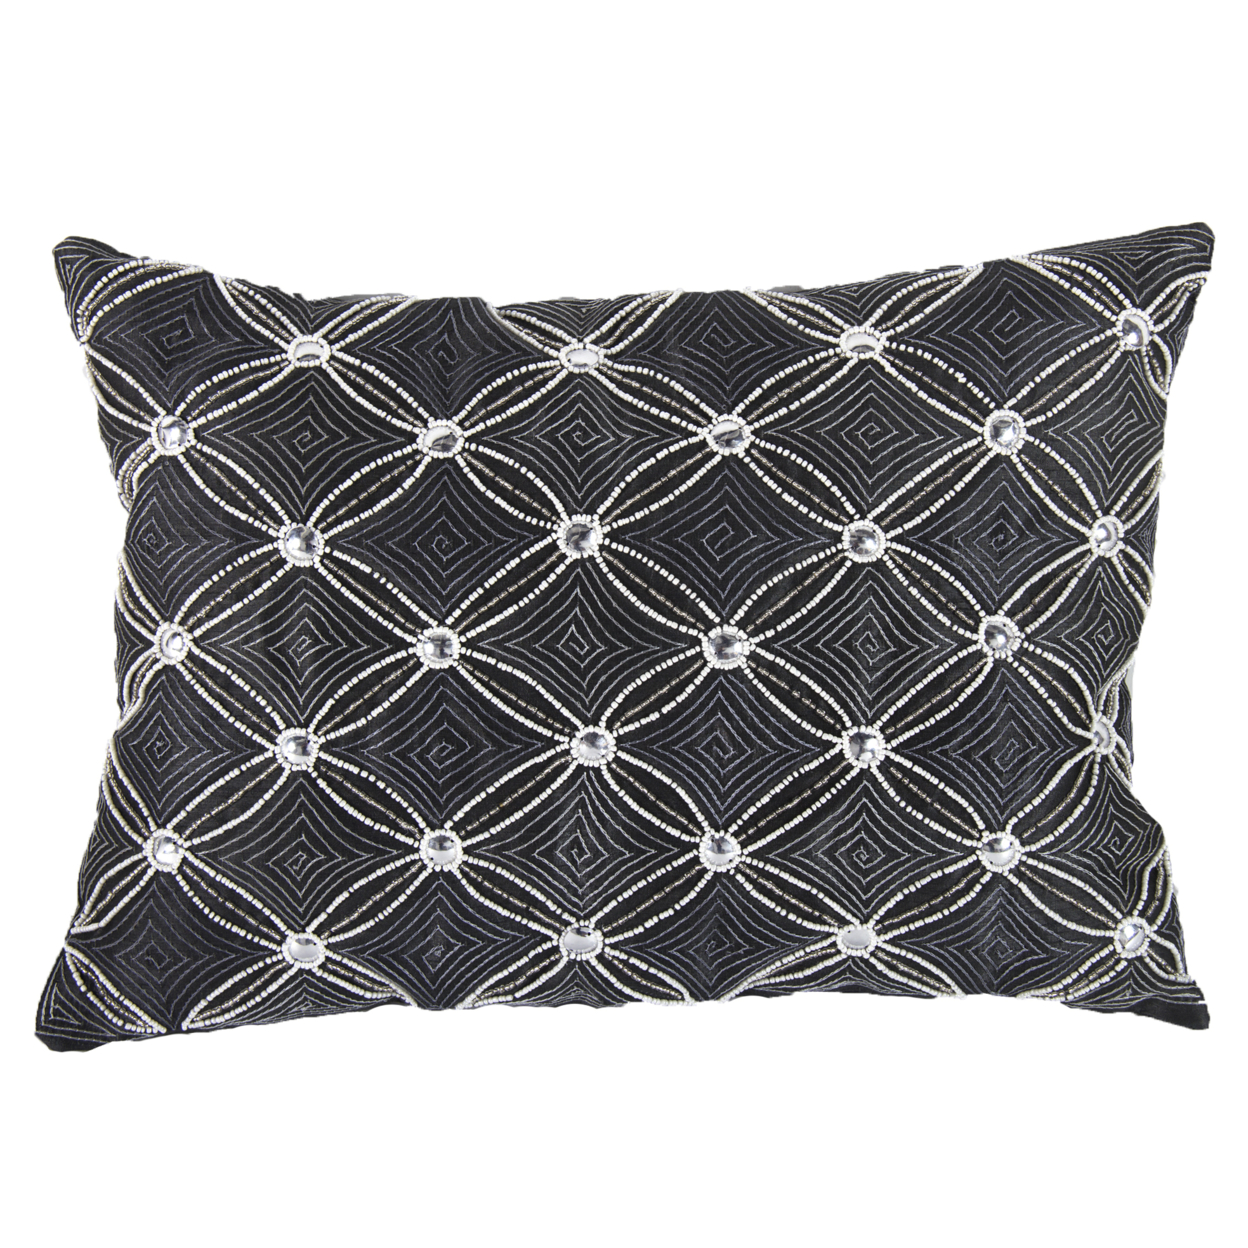 20 X 14 Inch Poly Silk Embellished Cotton Pillow, Set Of 2, Gray And Silver- Saltoro Sherpi